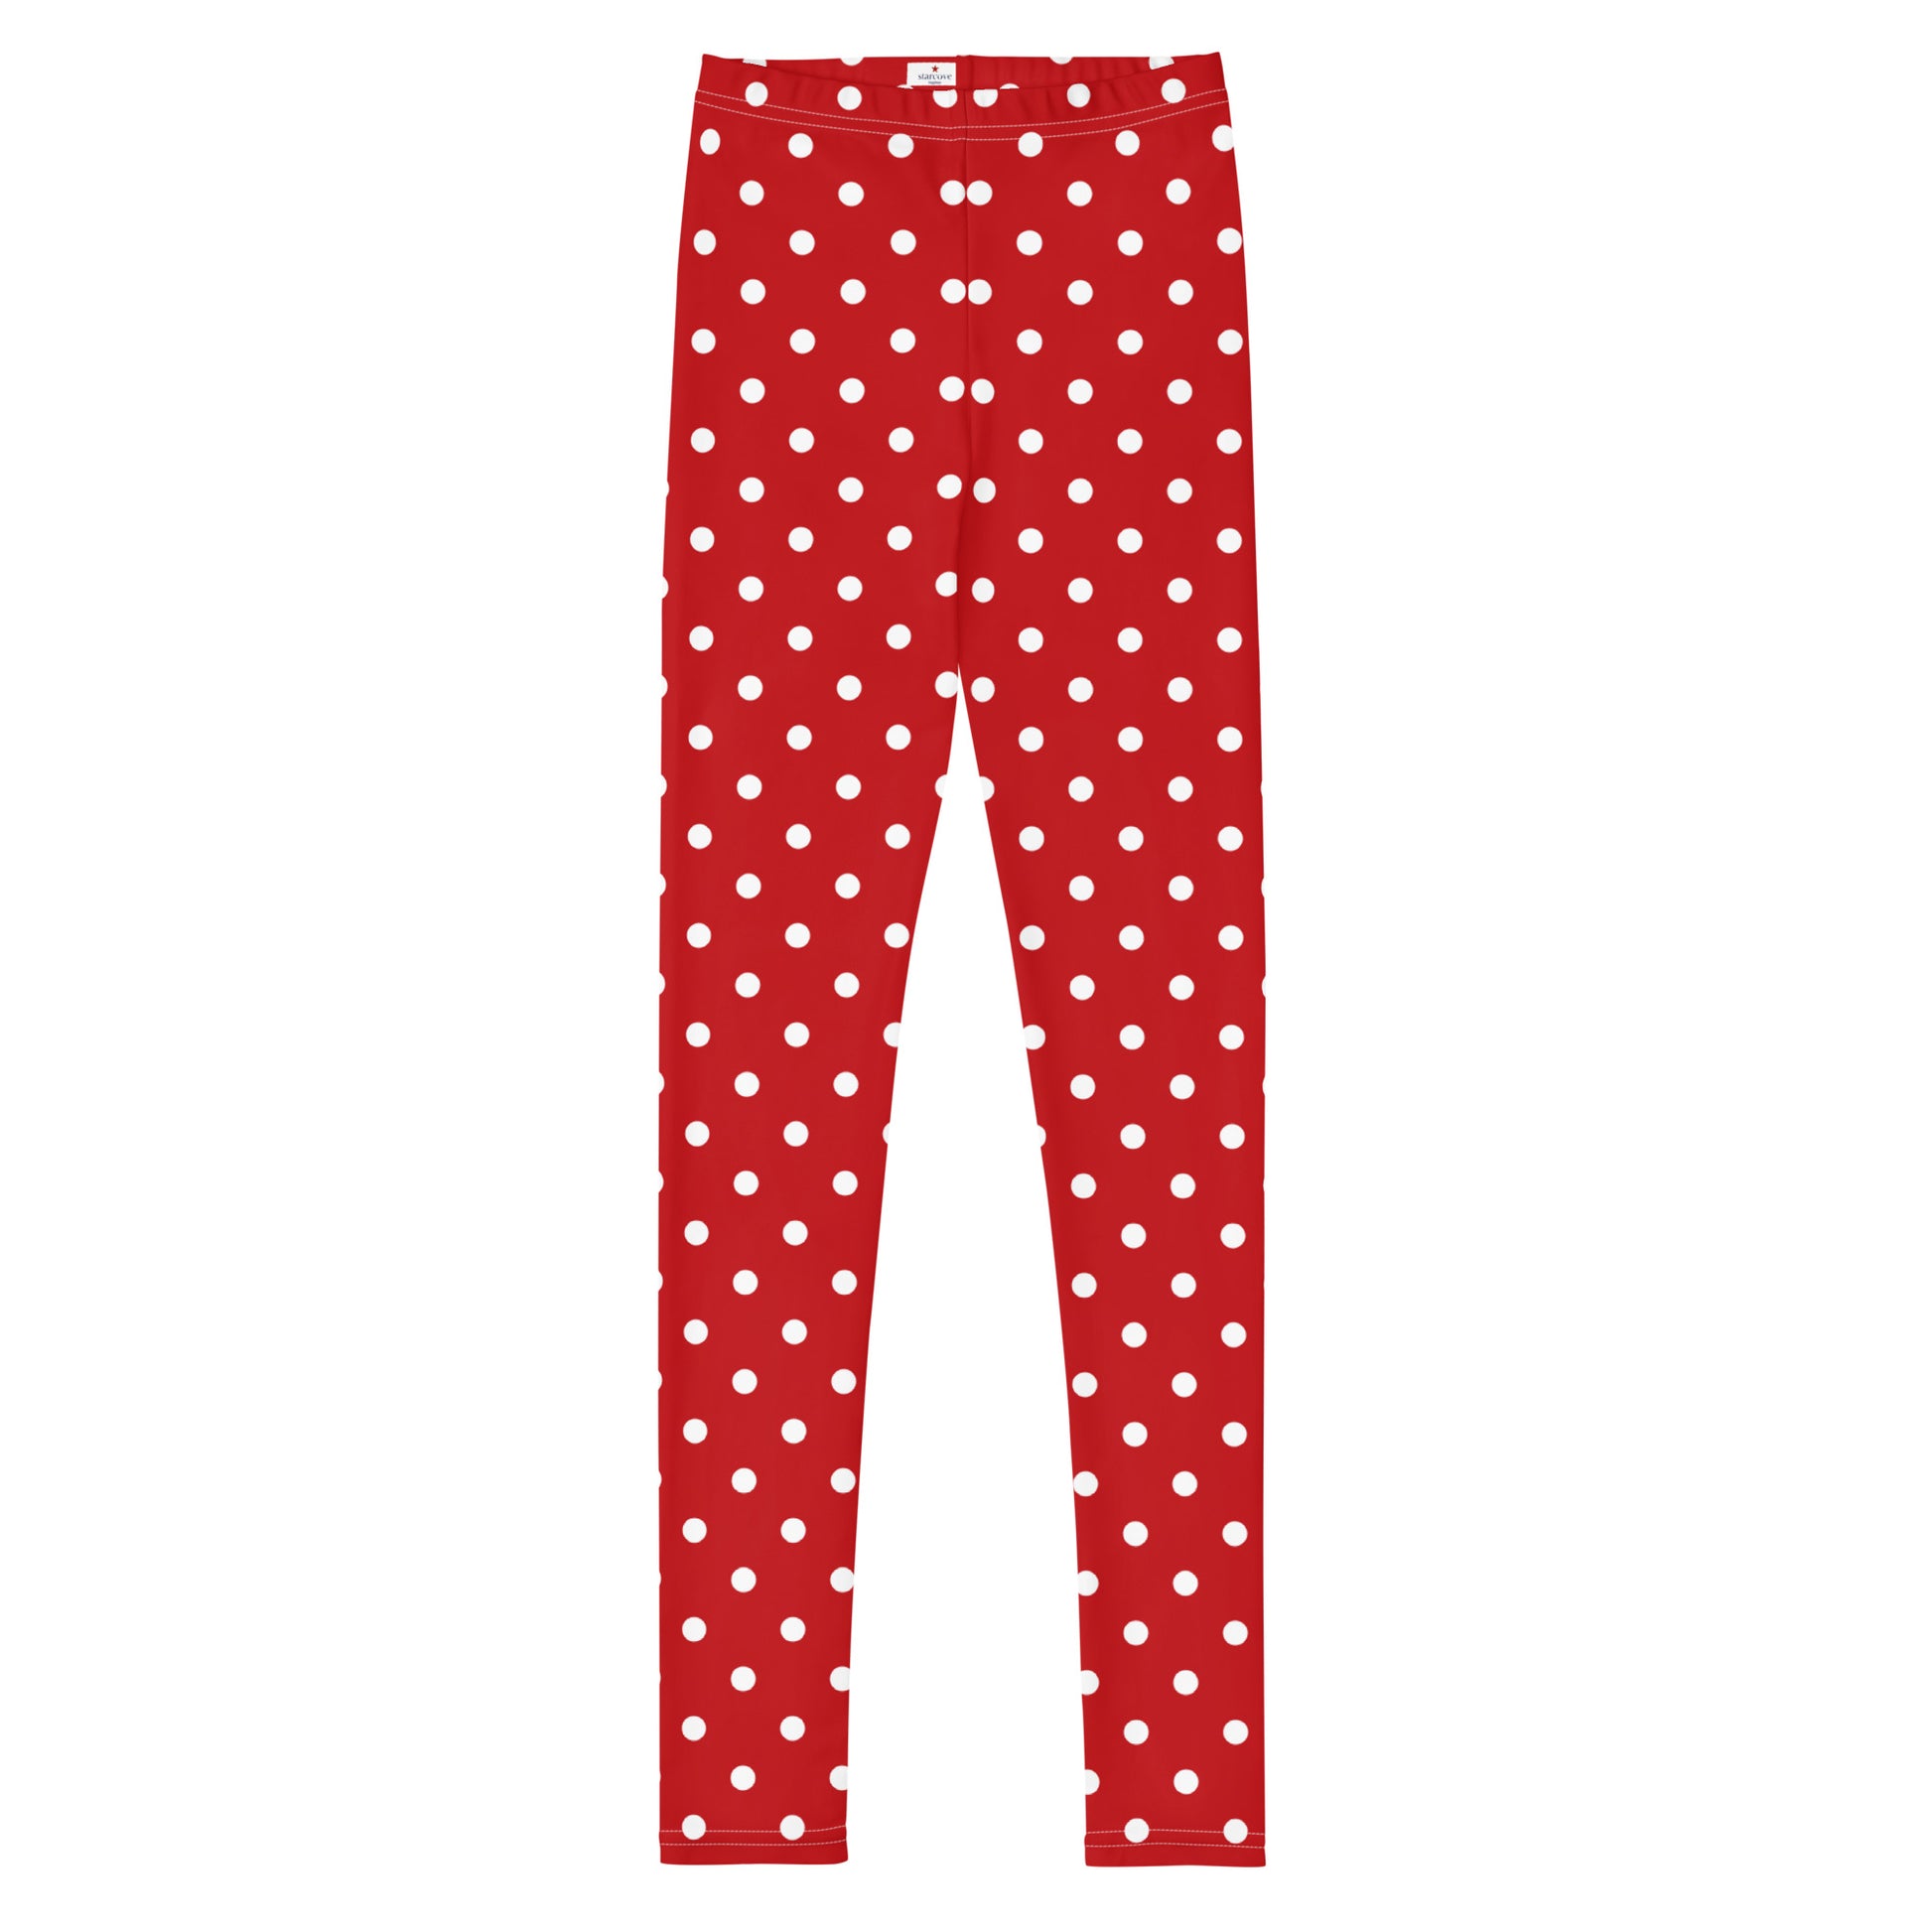 Red and White Polka Dots Girls Leggings (8-20), Kids Youth Teen